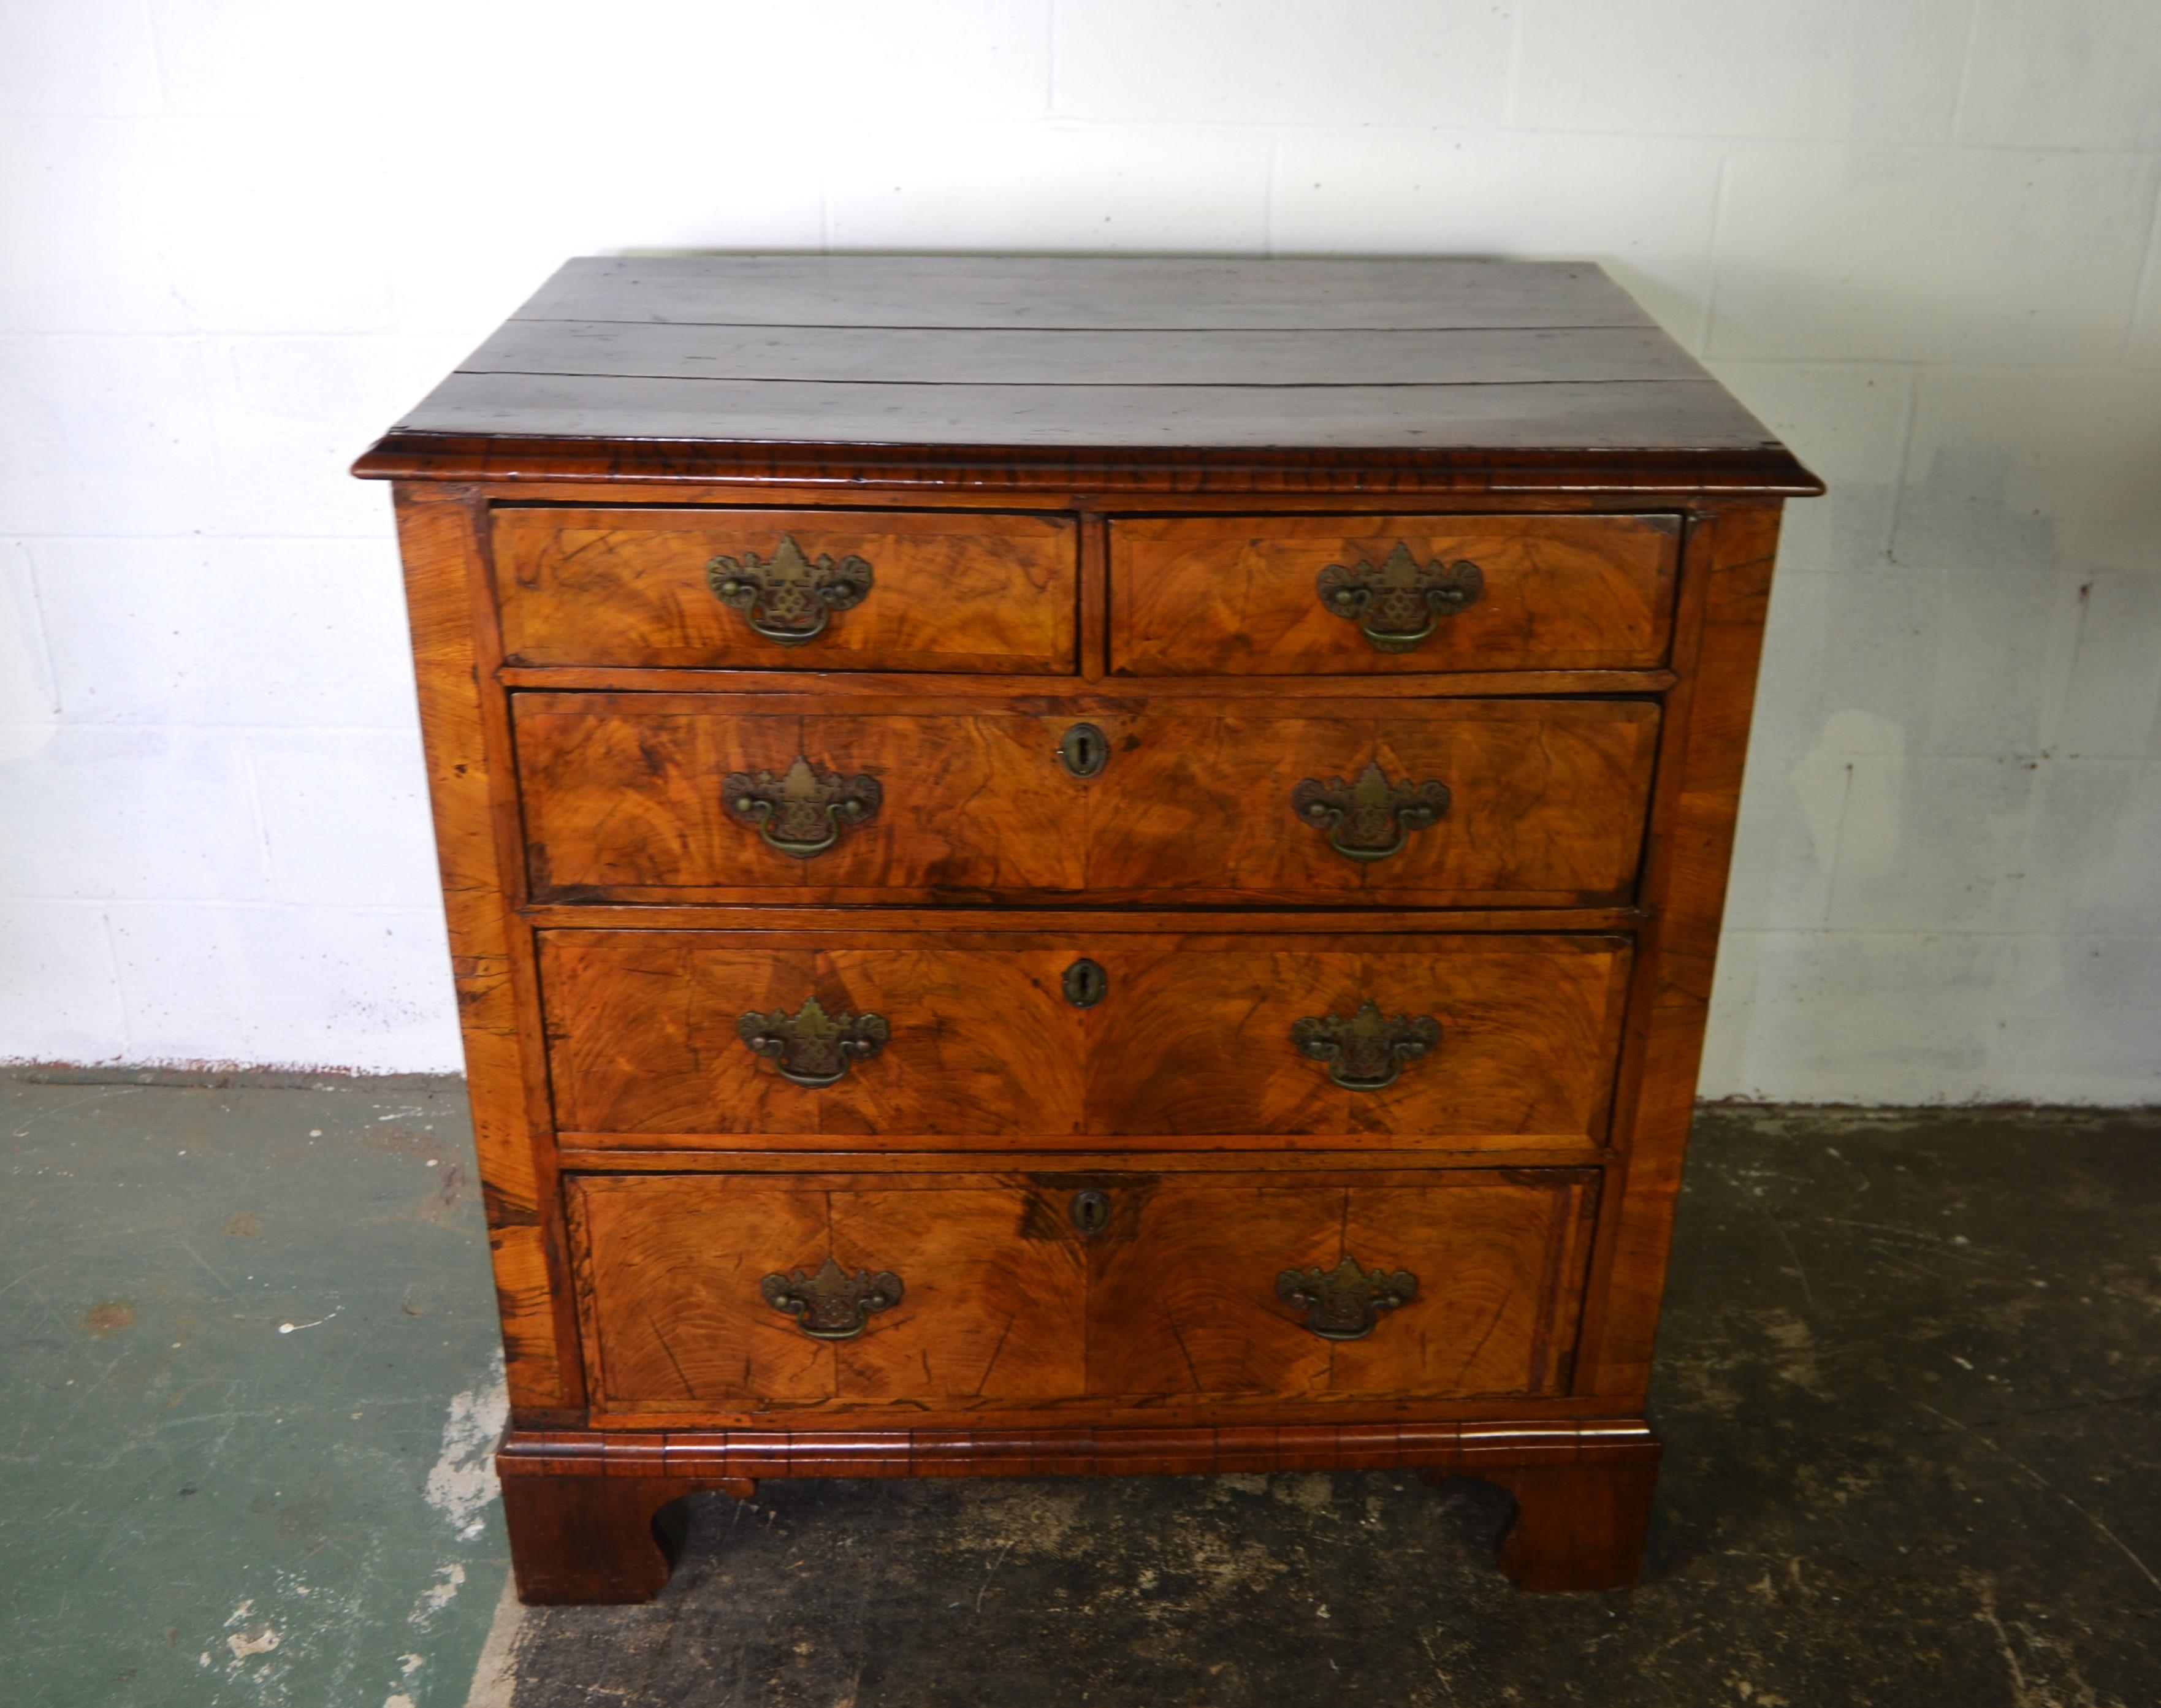 A  George II Walnut Chest of Drawers with nice proportions.  Cross-banded top and drawers. Oak drawer liners. Bracket feet  c.1835